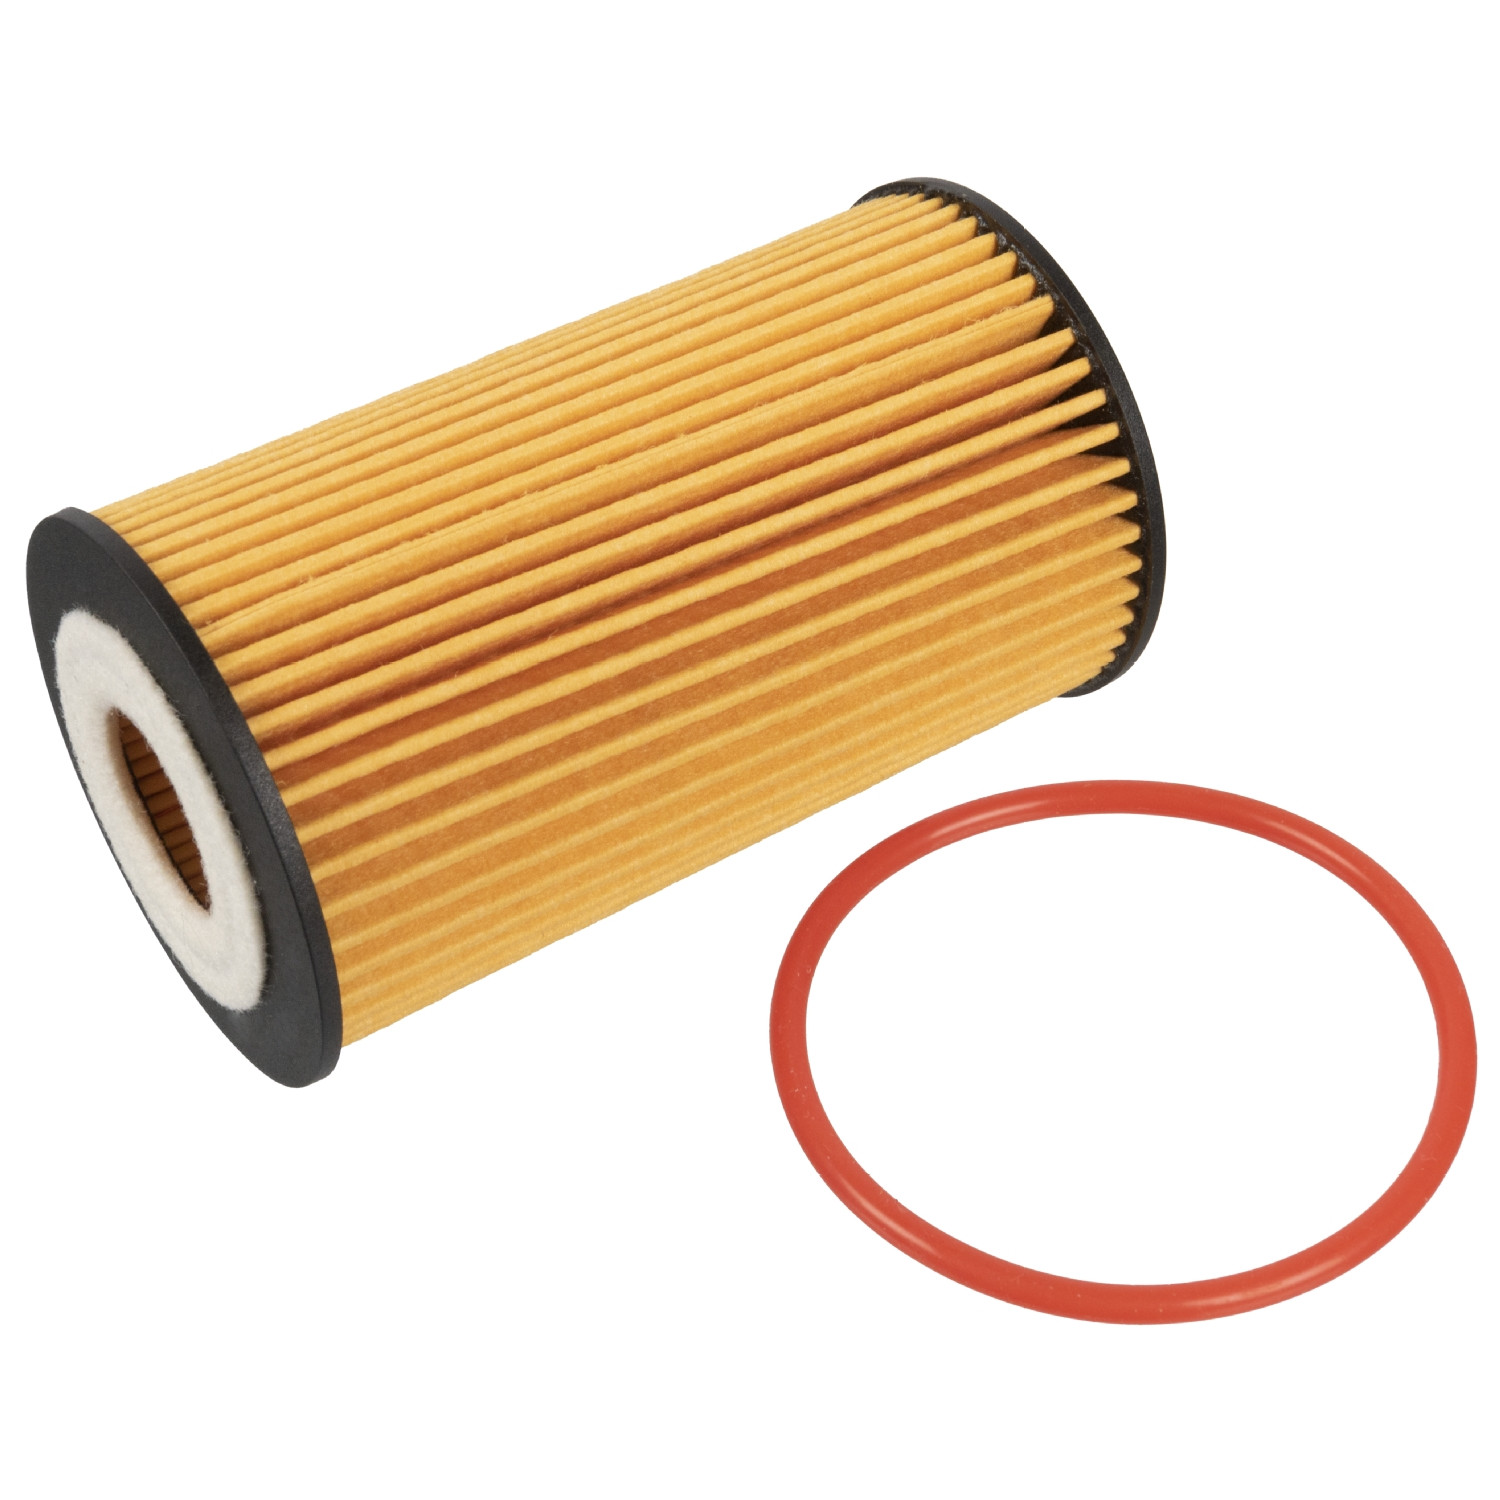 pack of one Blue Print ADV182125 Oil Filter with seal rings